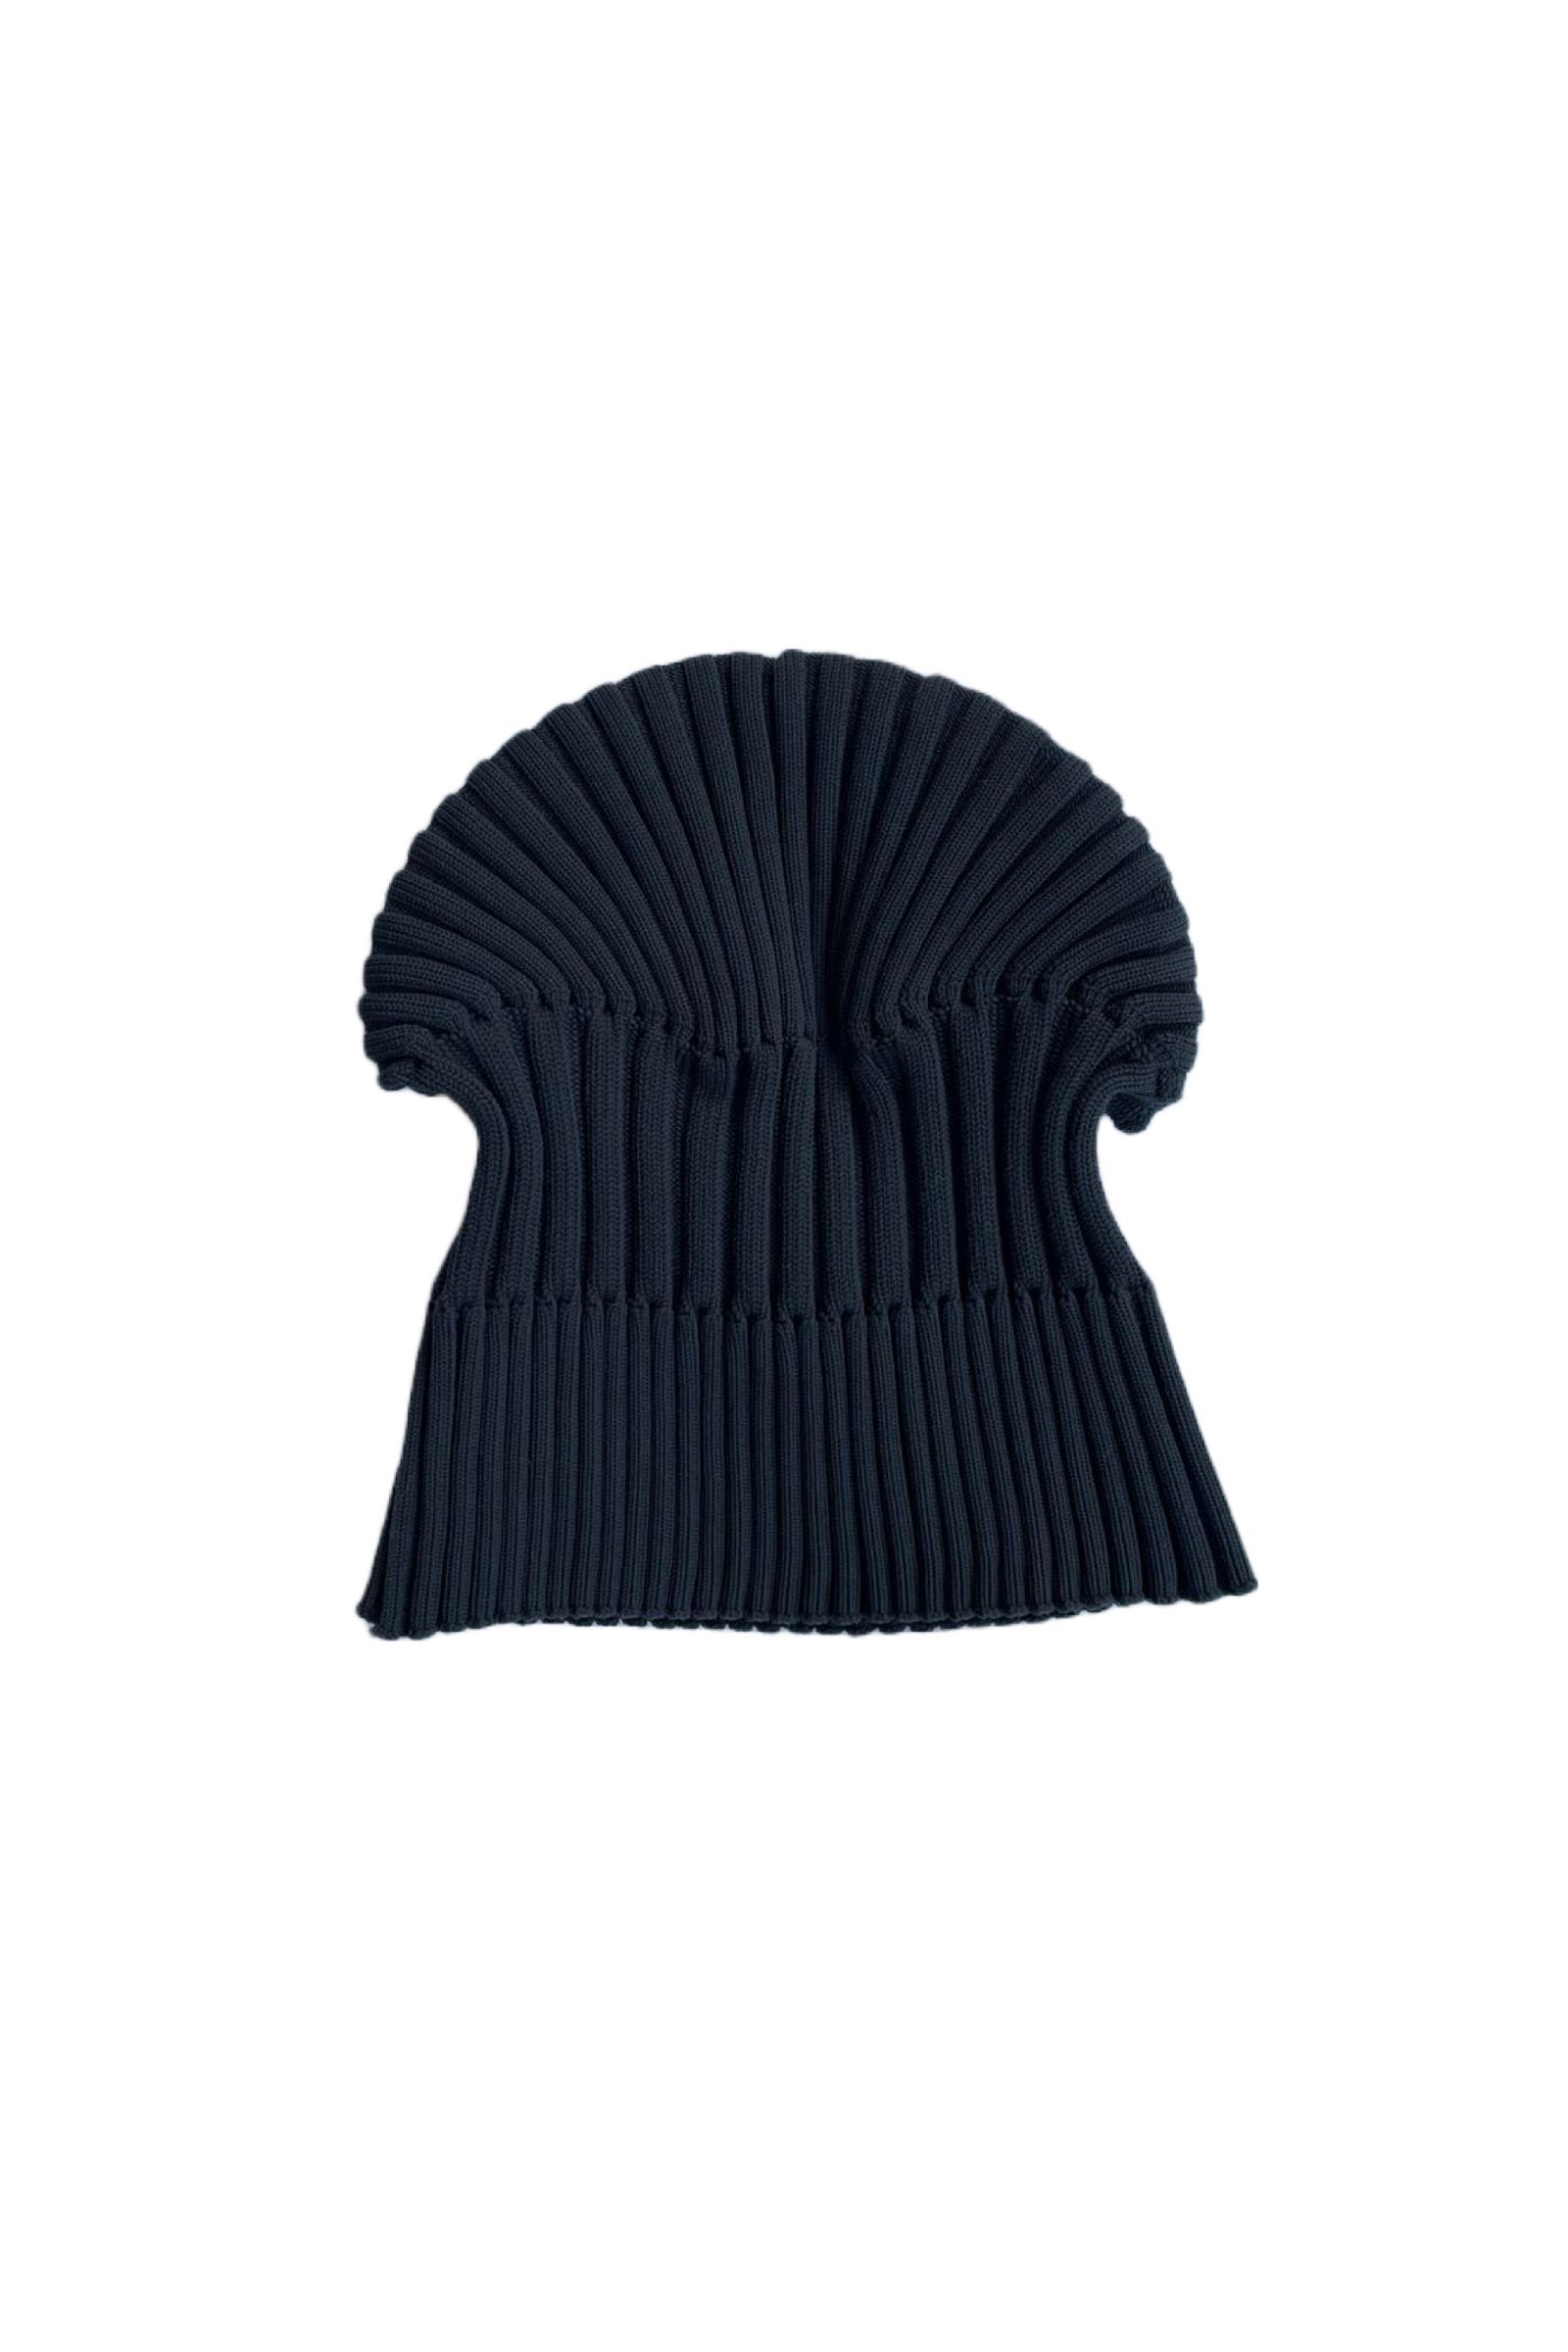 CFCL - fluted knit cap 1 -black- 22aw unisex | asterisk